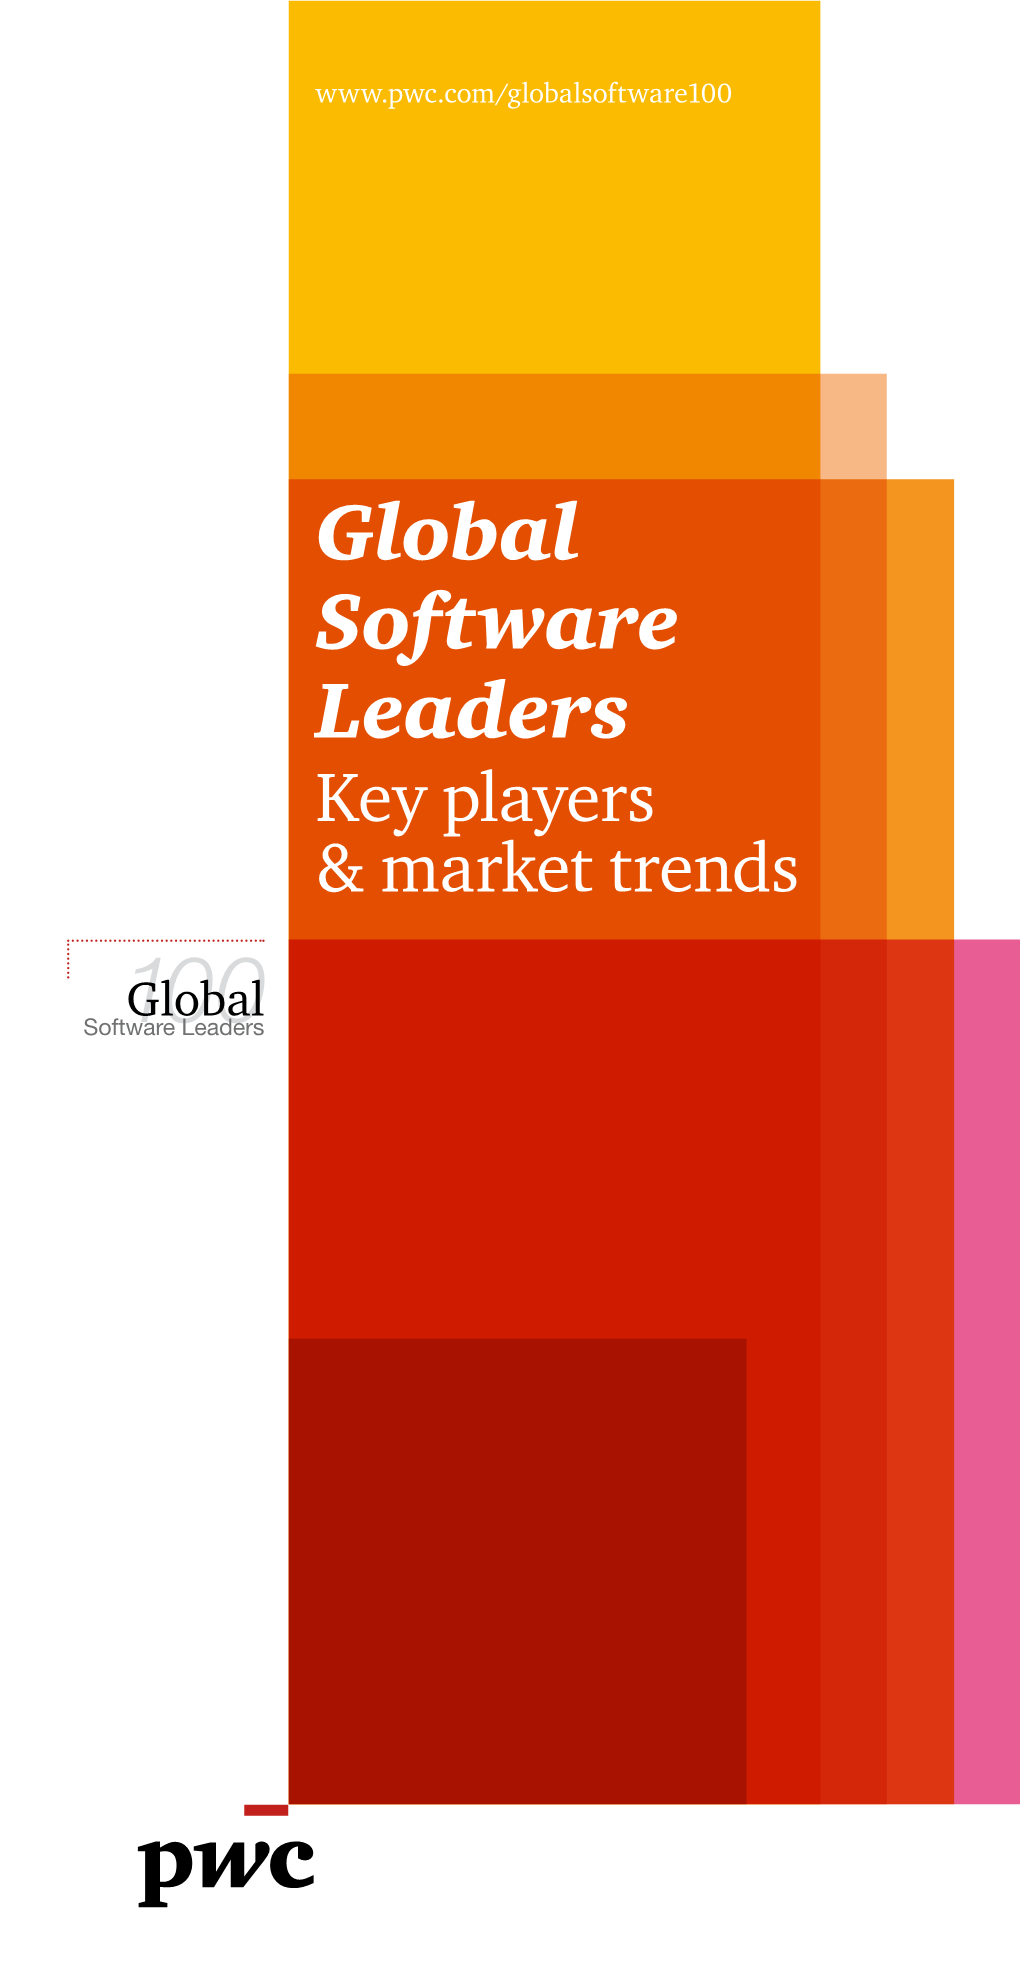 Global Software Leaders Key Players & Market Trends